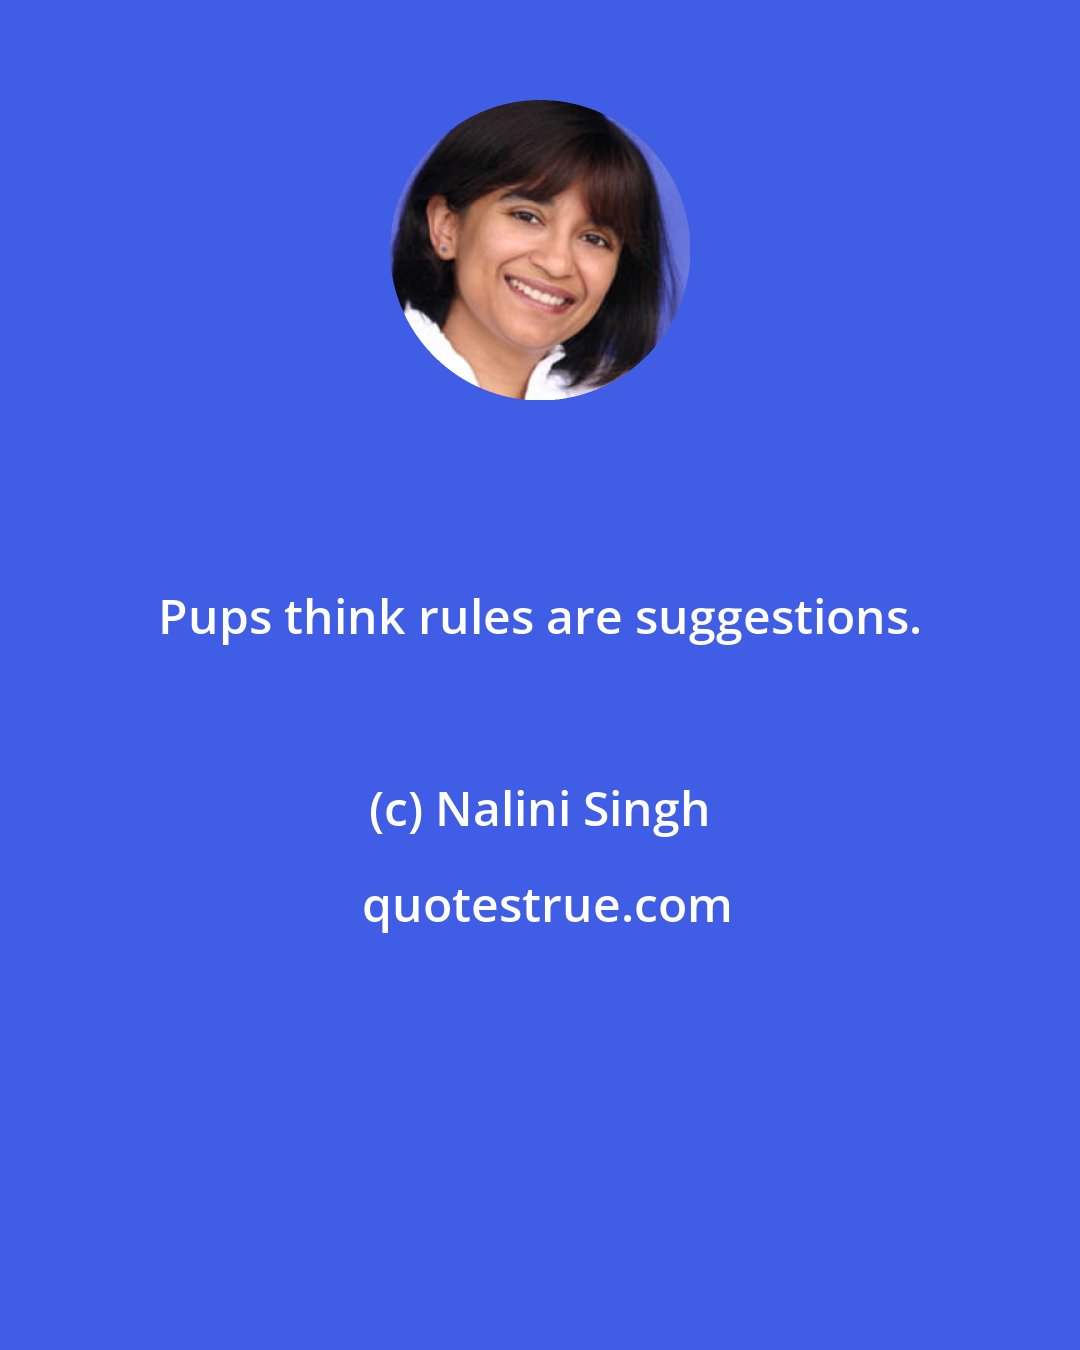 Nalini Singh: Pups think rules are suggestions.